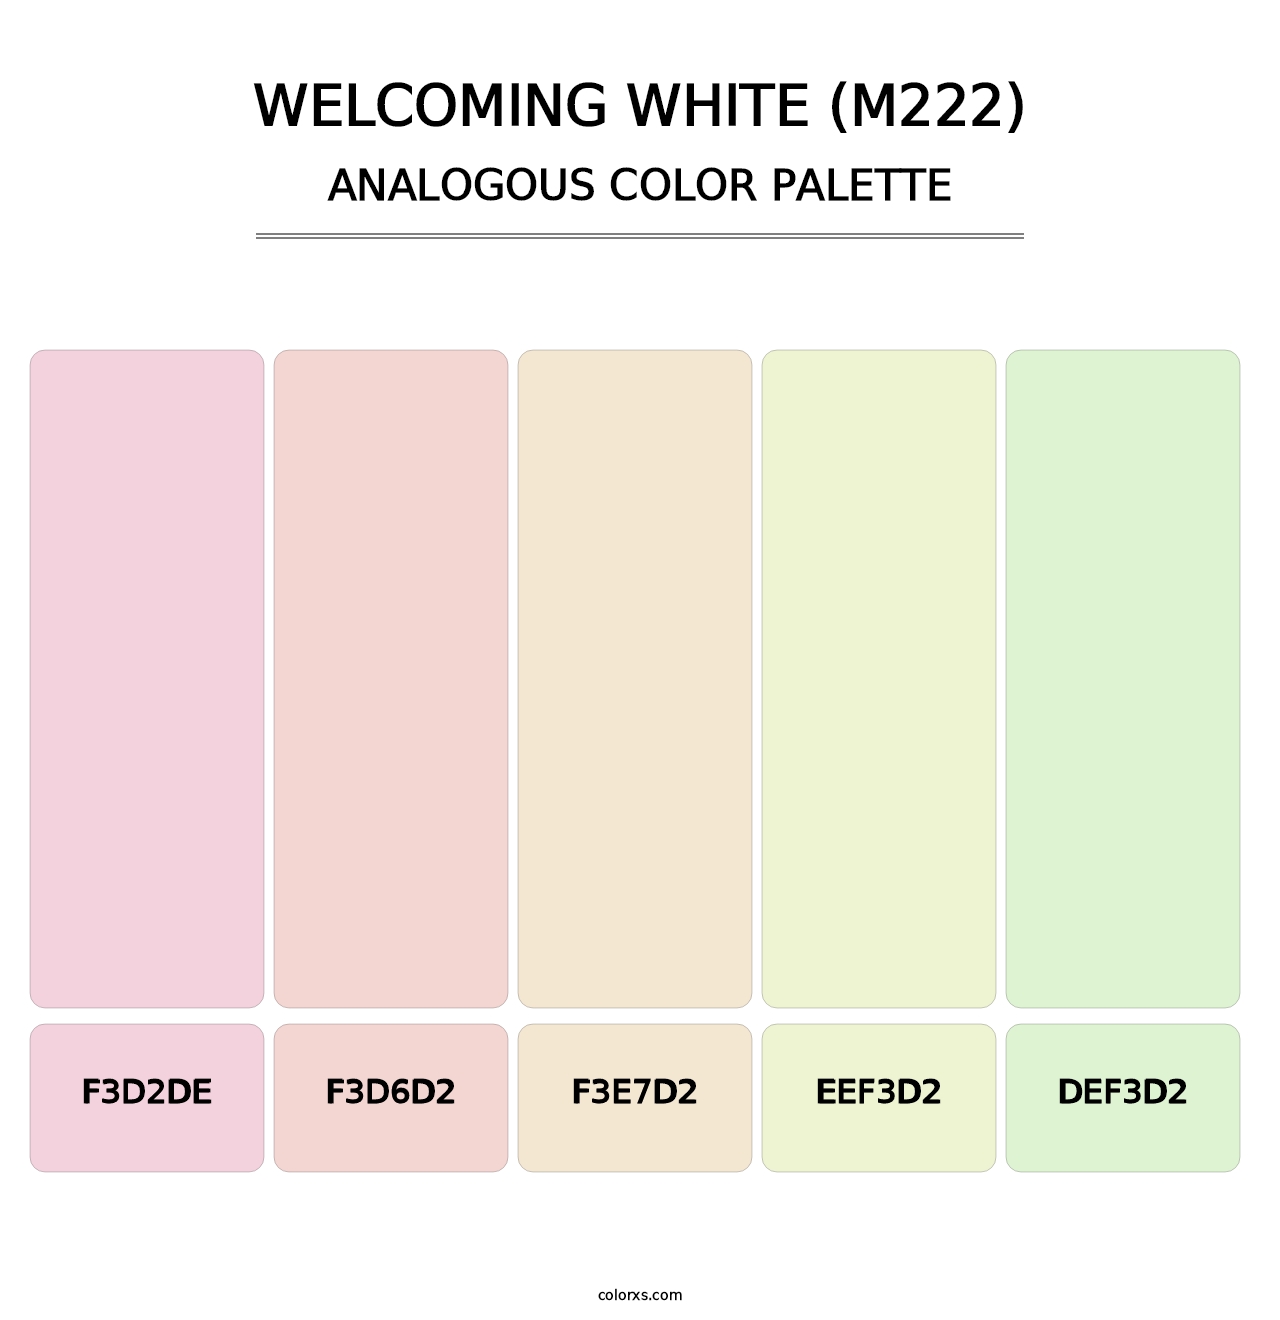 Welcoming White (M222) - Analogous Color Palette